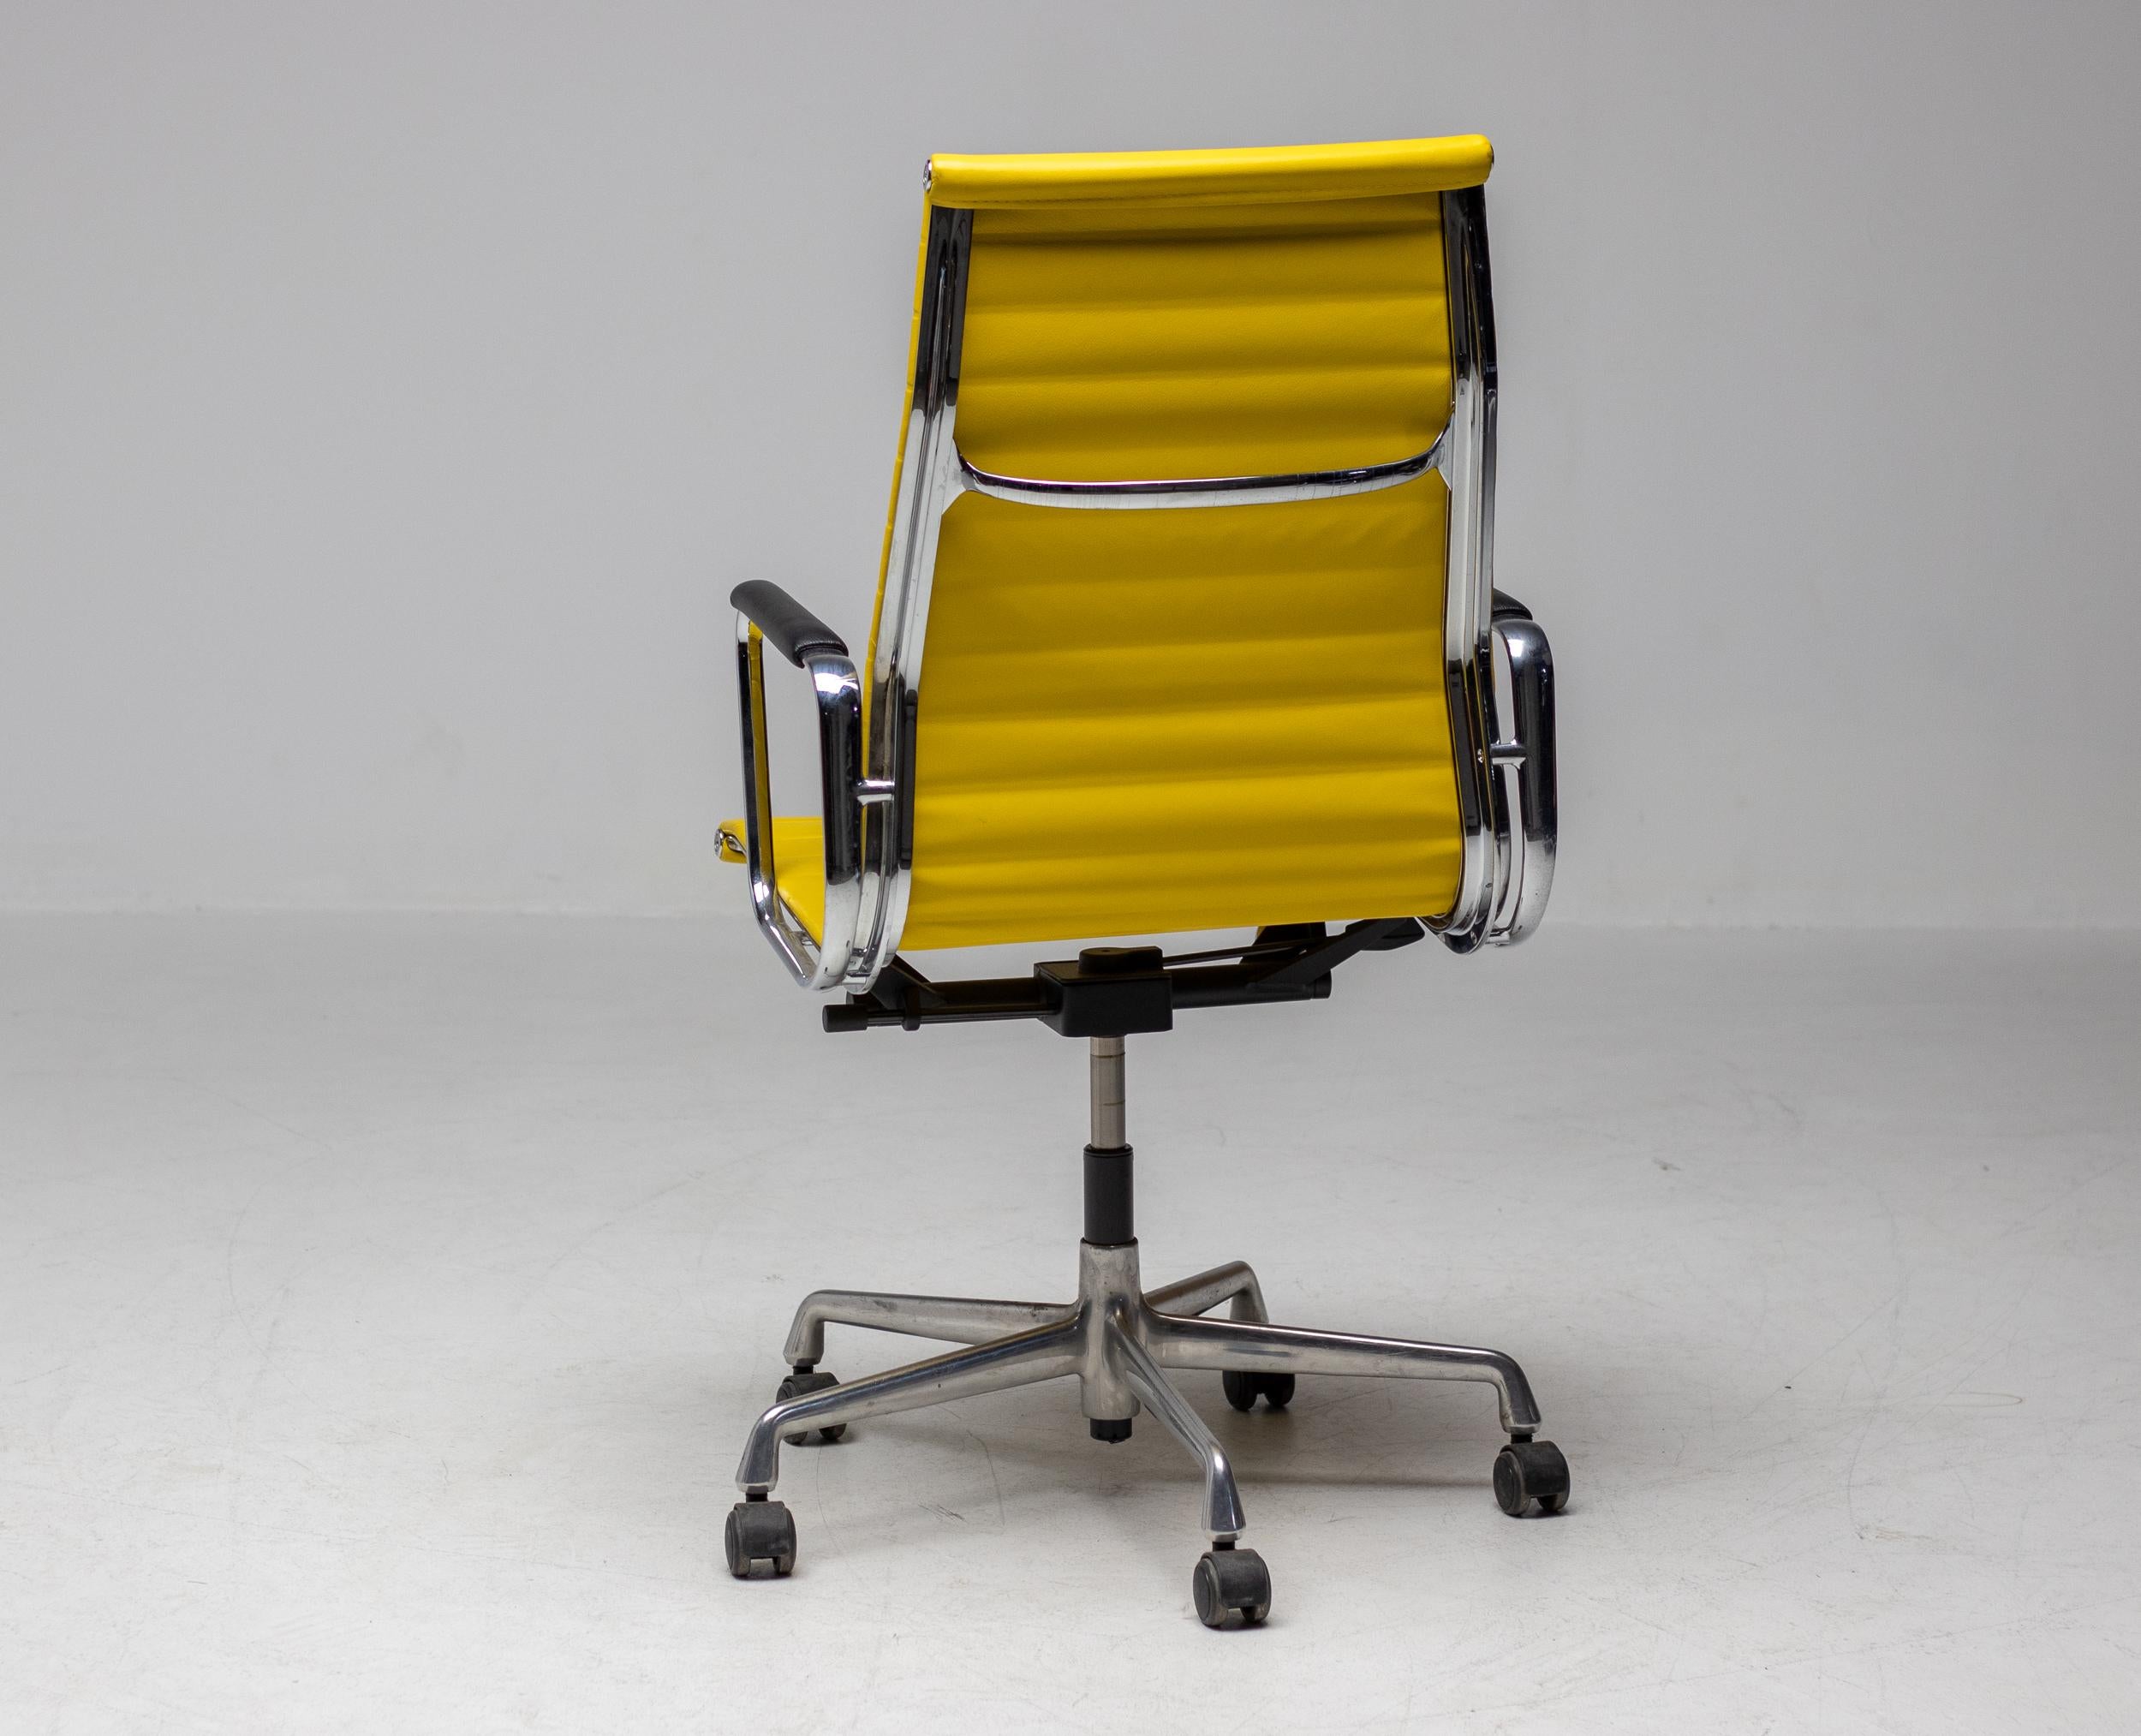 Executive office chair, model EA119, designed by Charles and Ray Eames for Vitra / Herman Miller. 
High backrest and seat in striking yellow Naugahyde. Frame, armrests and five-star base in die-cast aluminium. Seat mechanism with adjustable